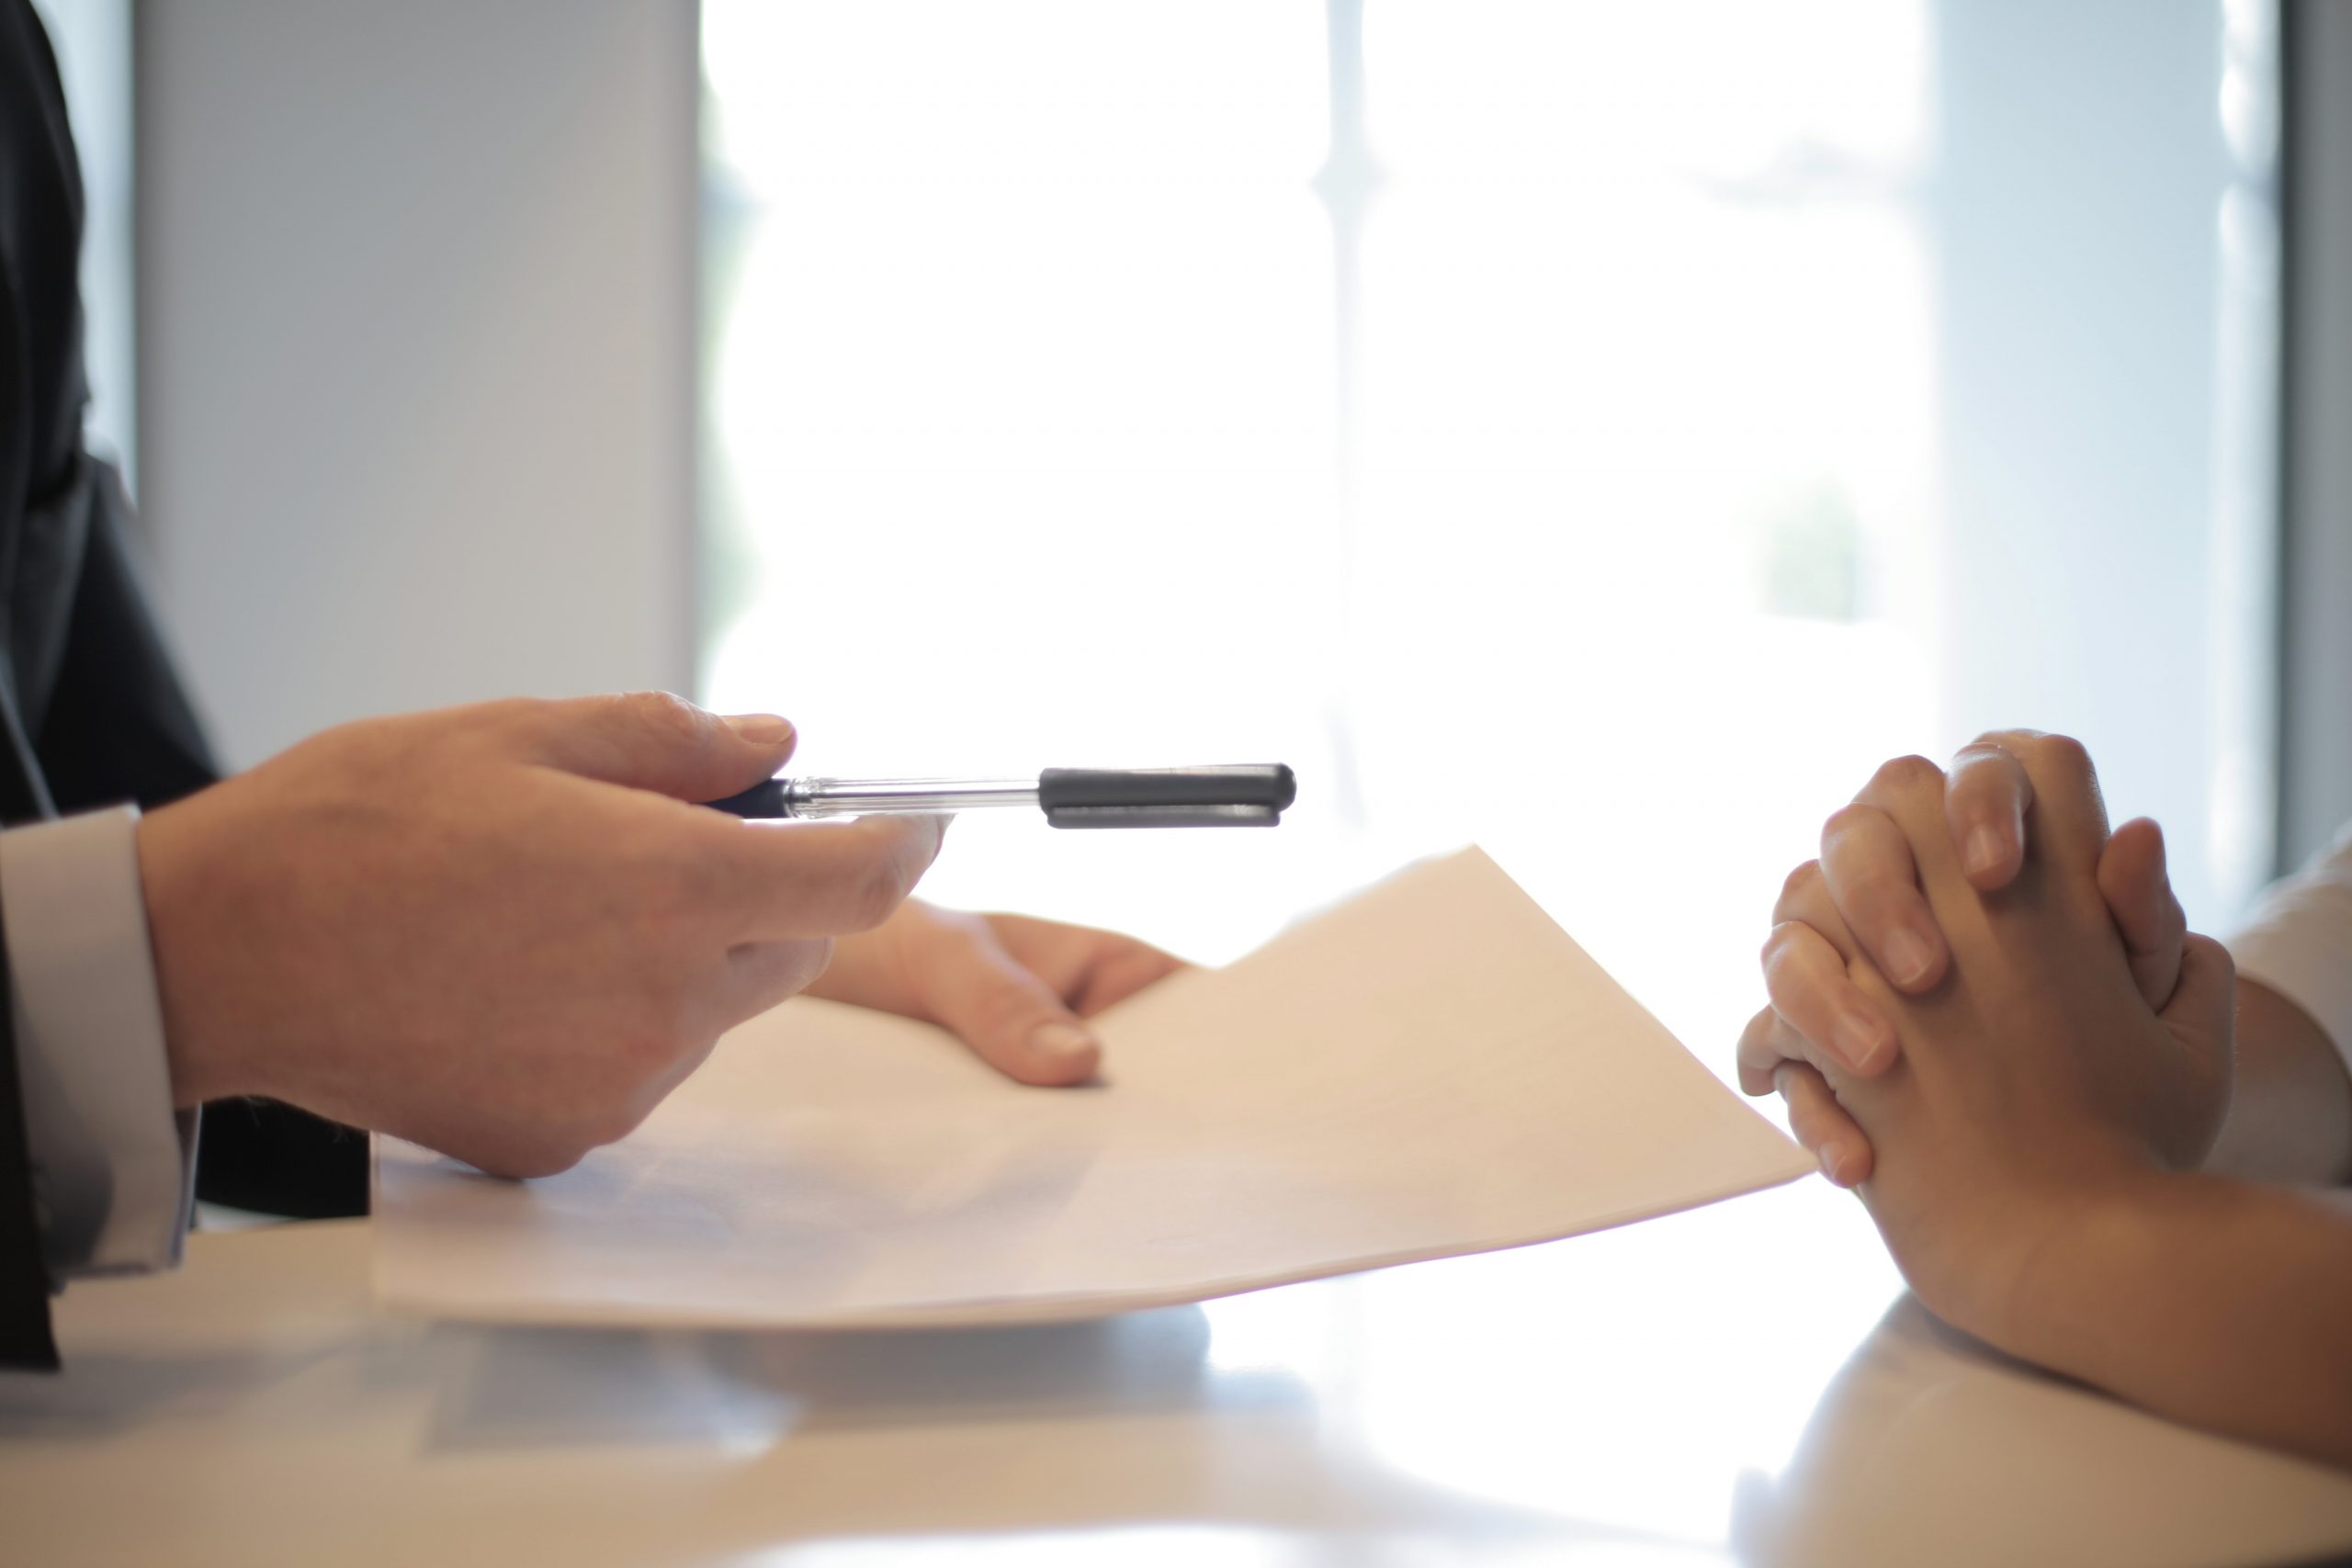 A close up shows a man's hands as he hands a contract for a woman clasping her hands to sign